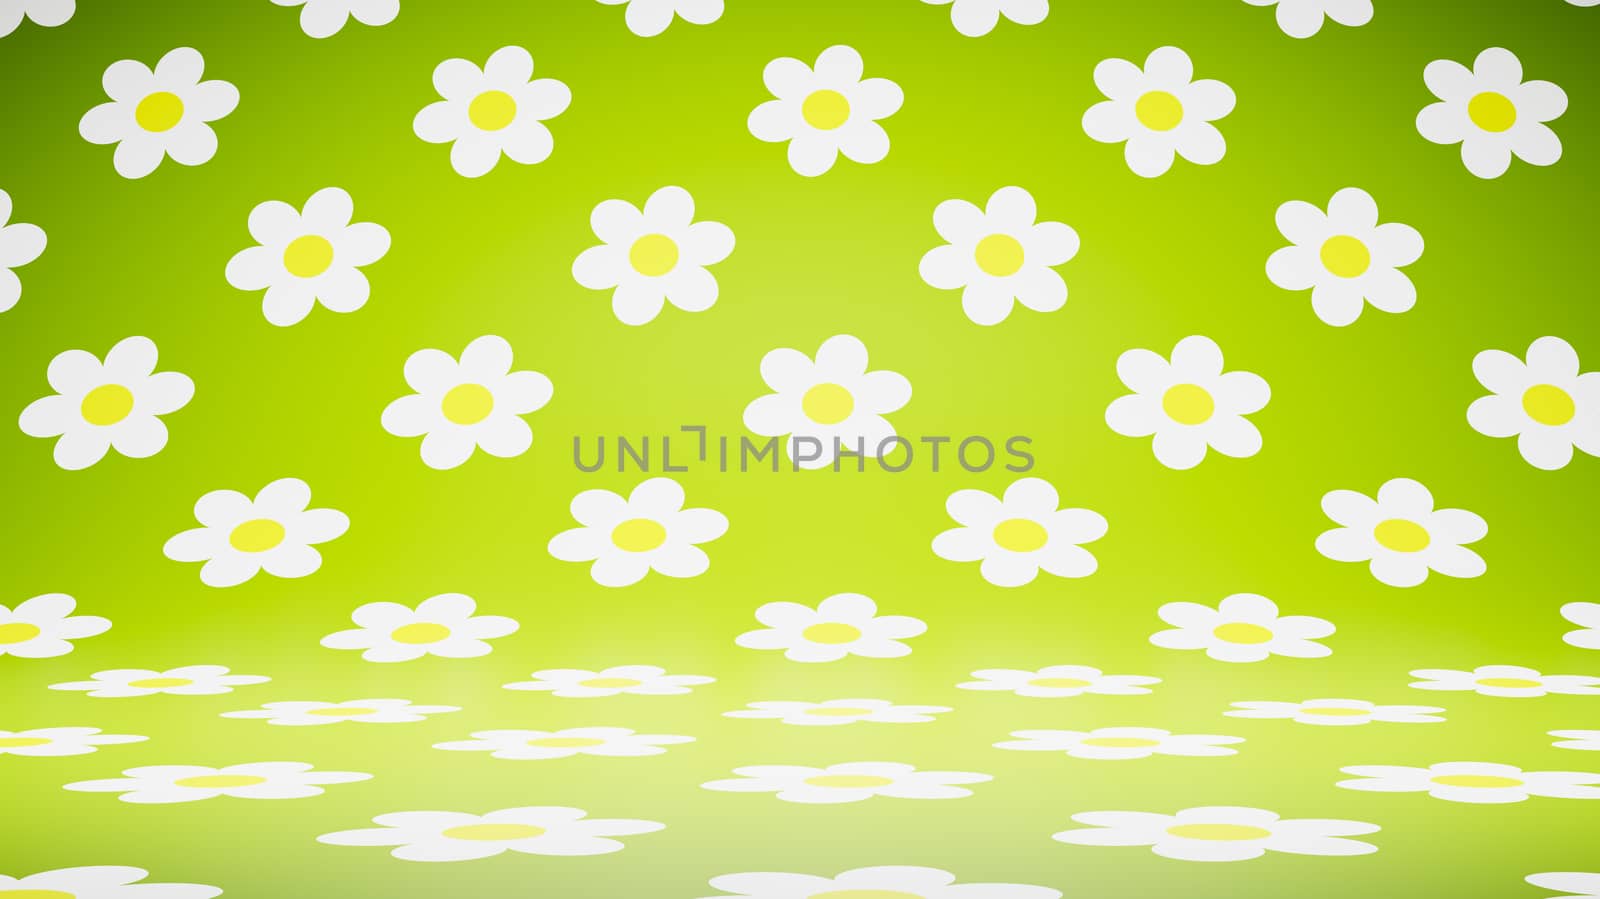 Empty Blank White and Green Daisy Pattern Studio Background 3D Render Illustration